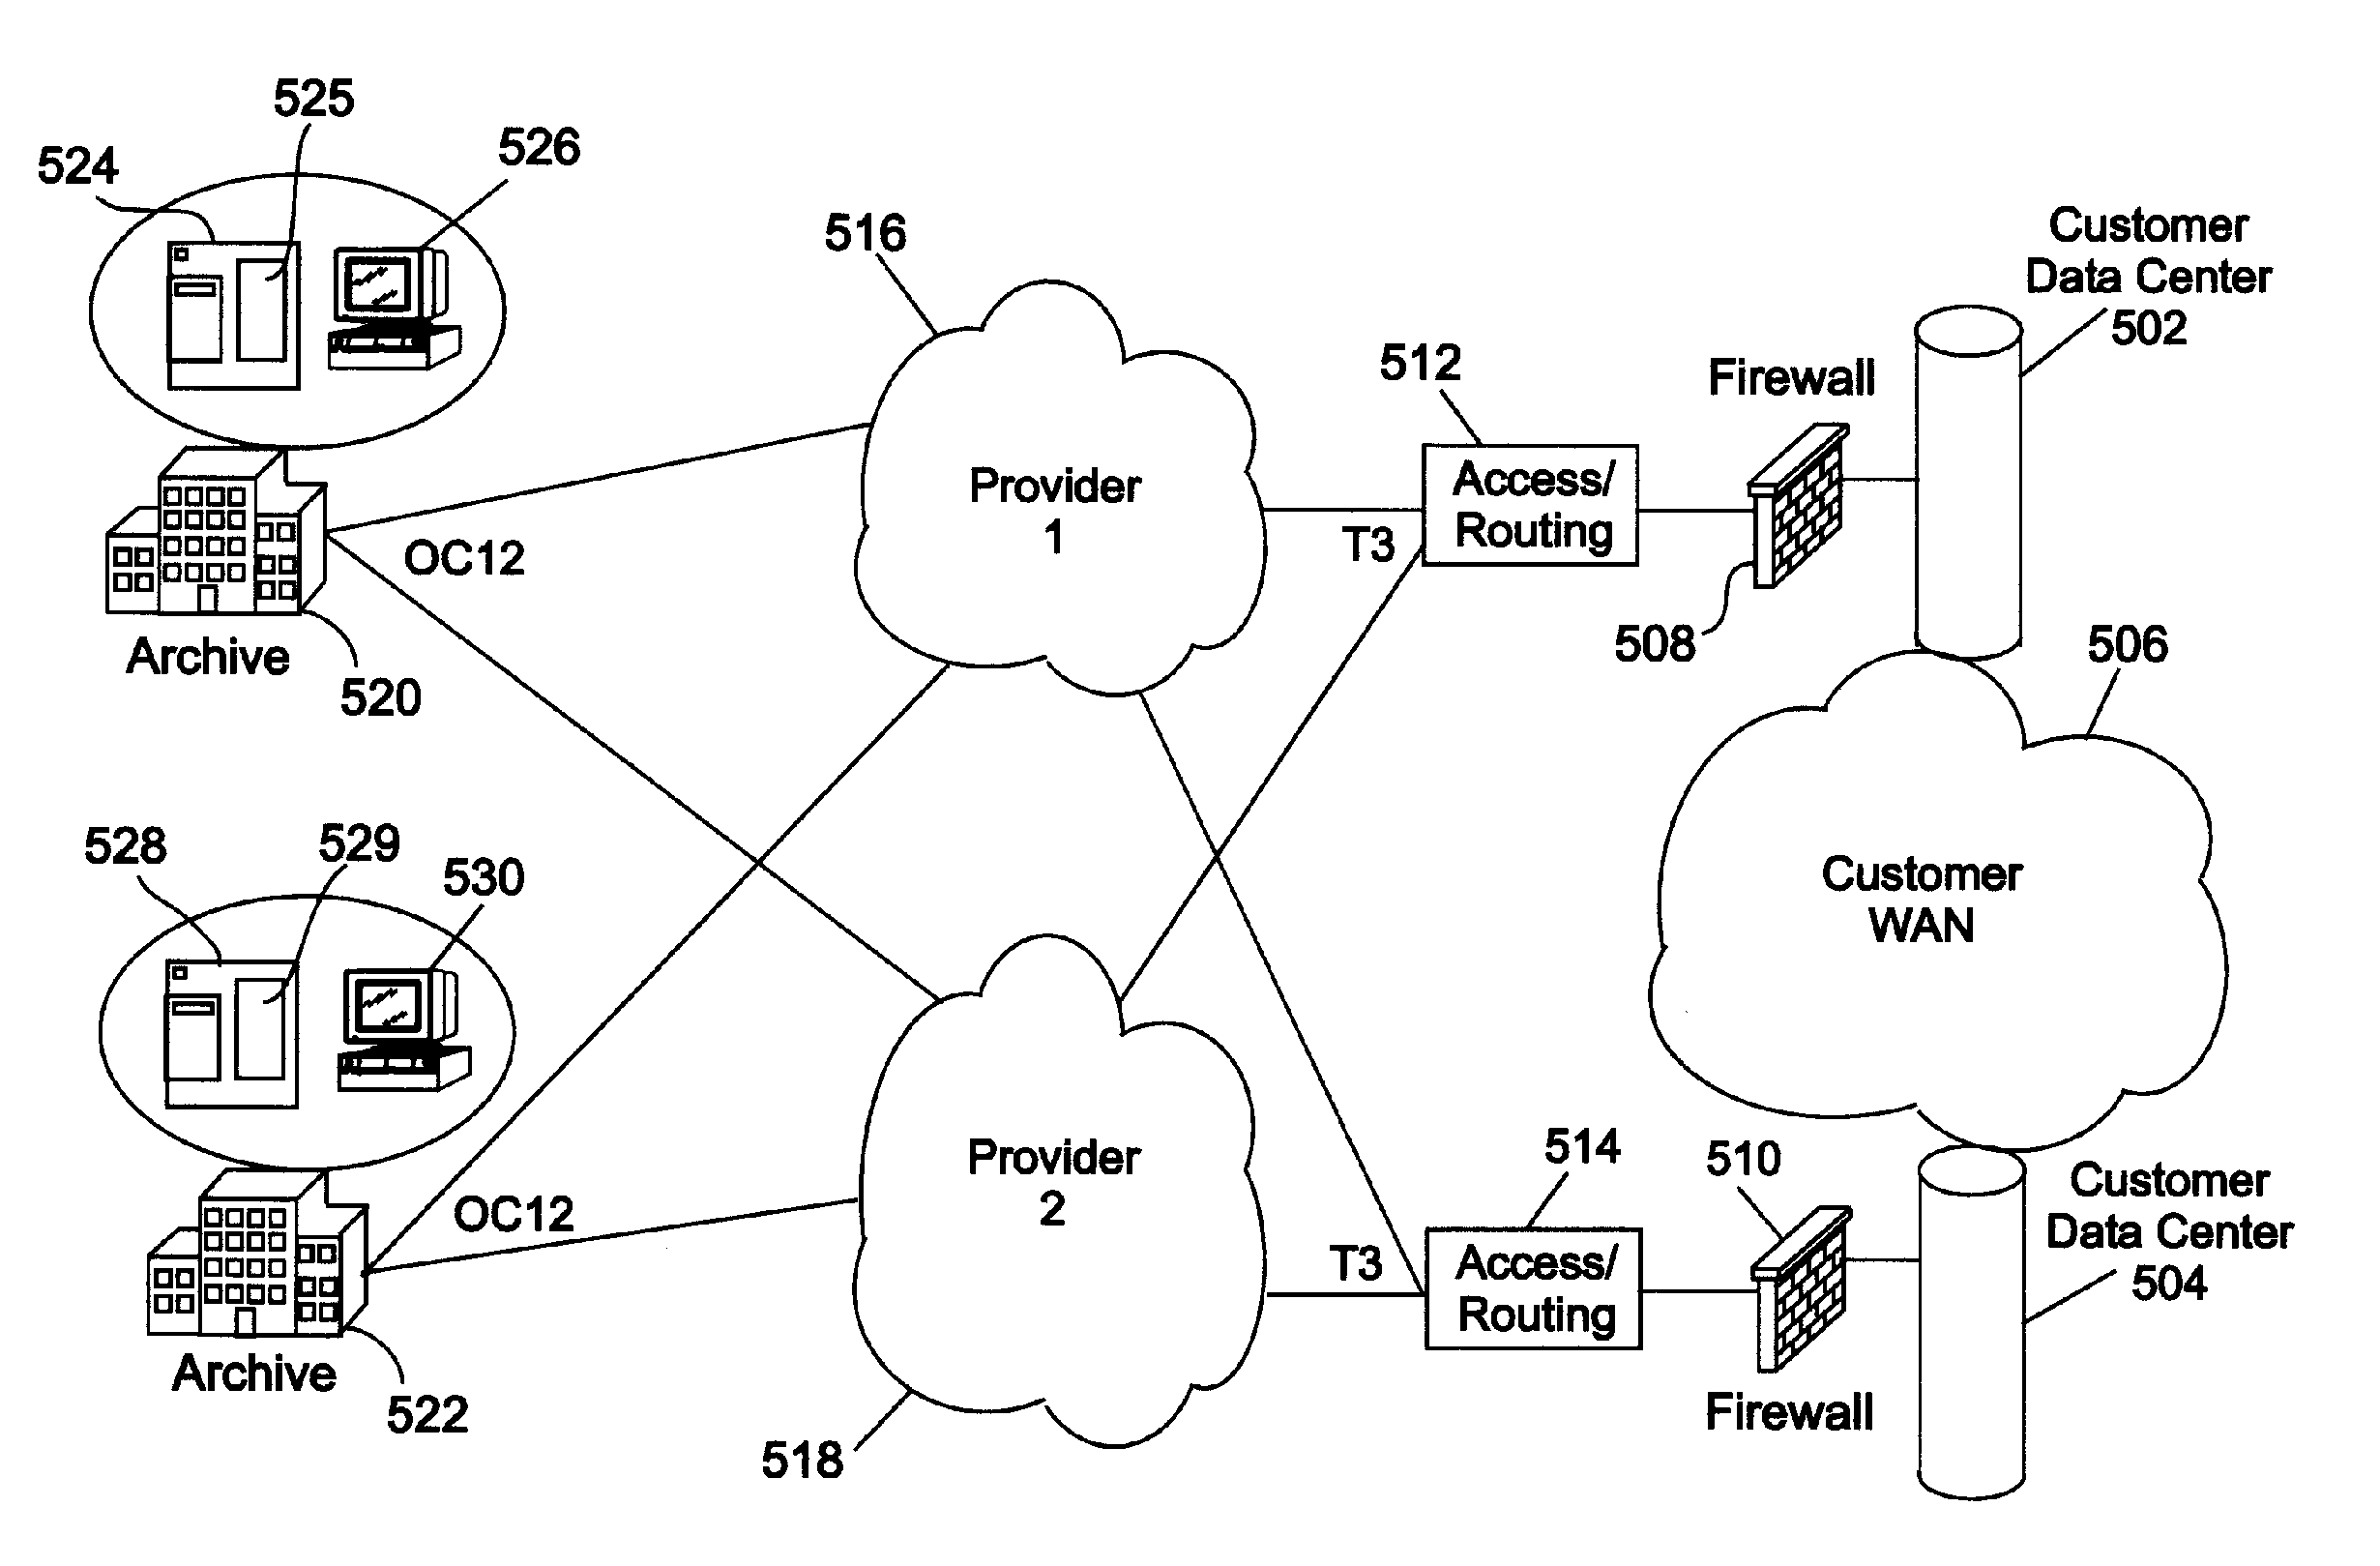 Centralized check image storage system